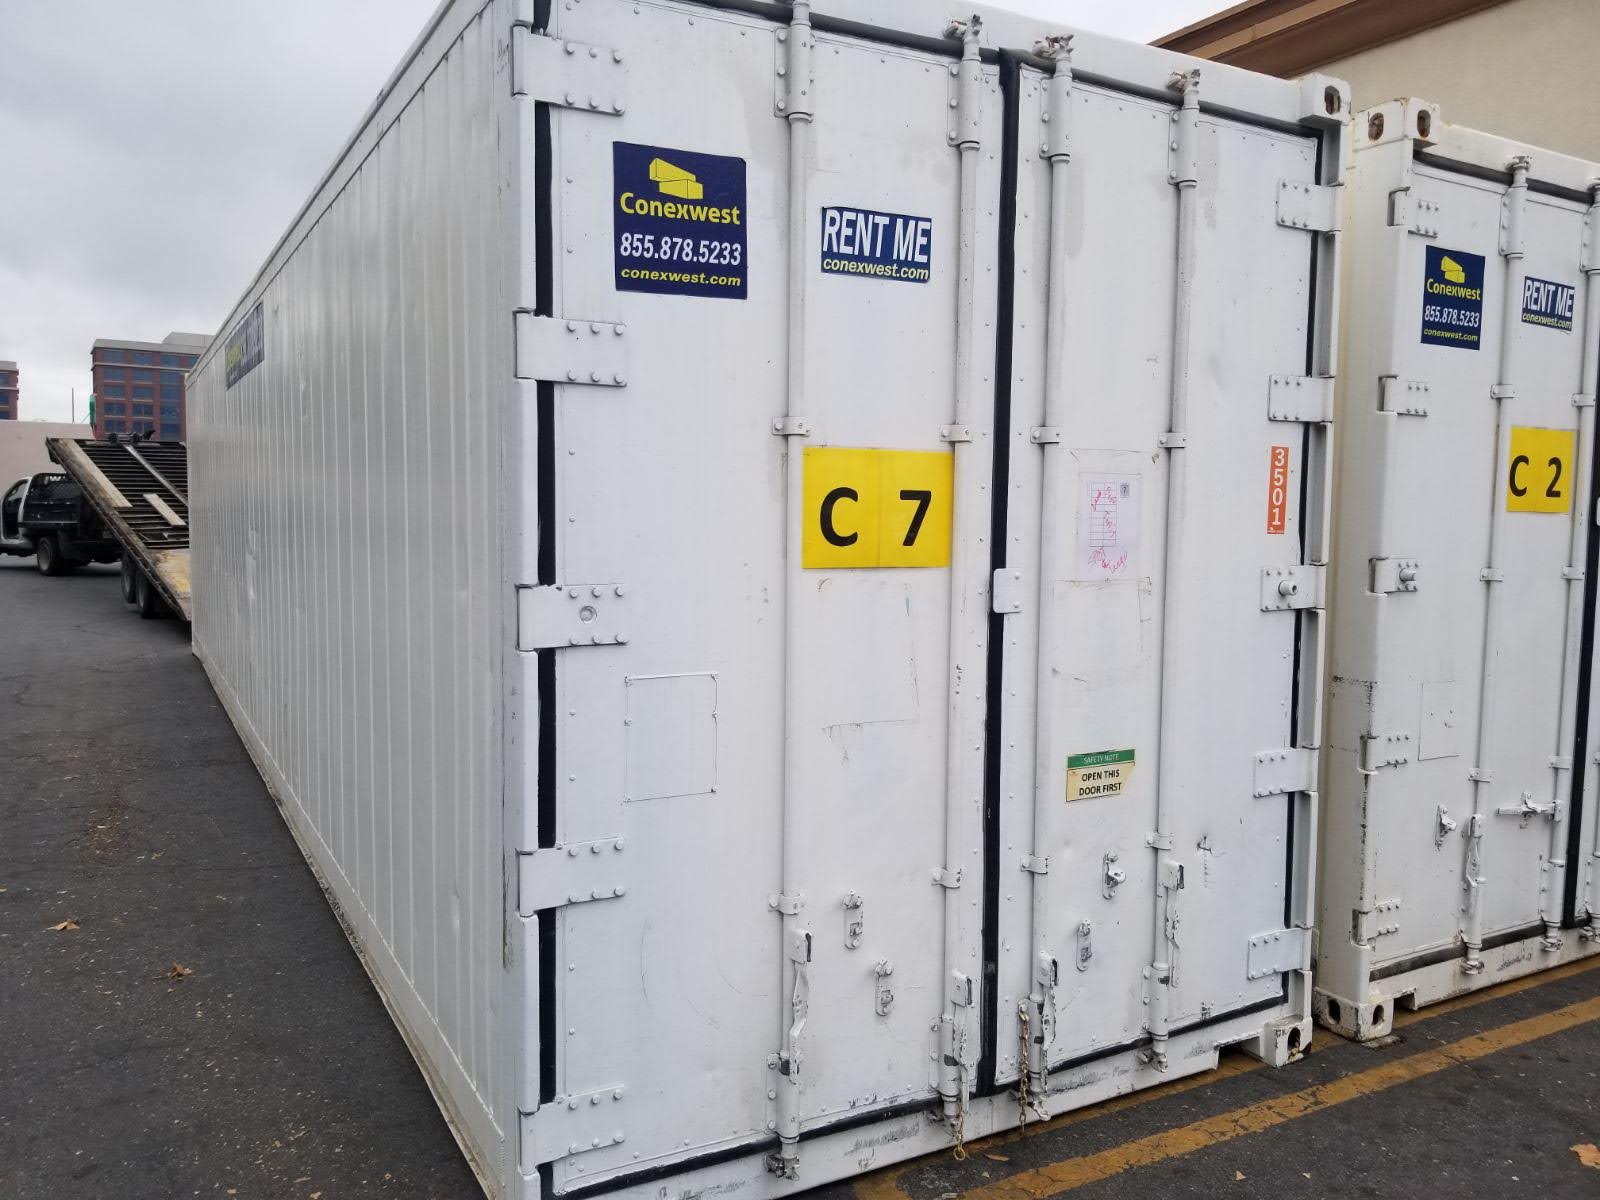 Conexwest: Conex Containers & Storage Boxes for Sale Near Me